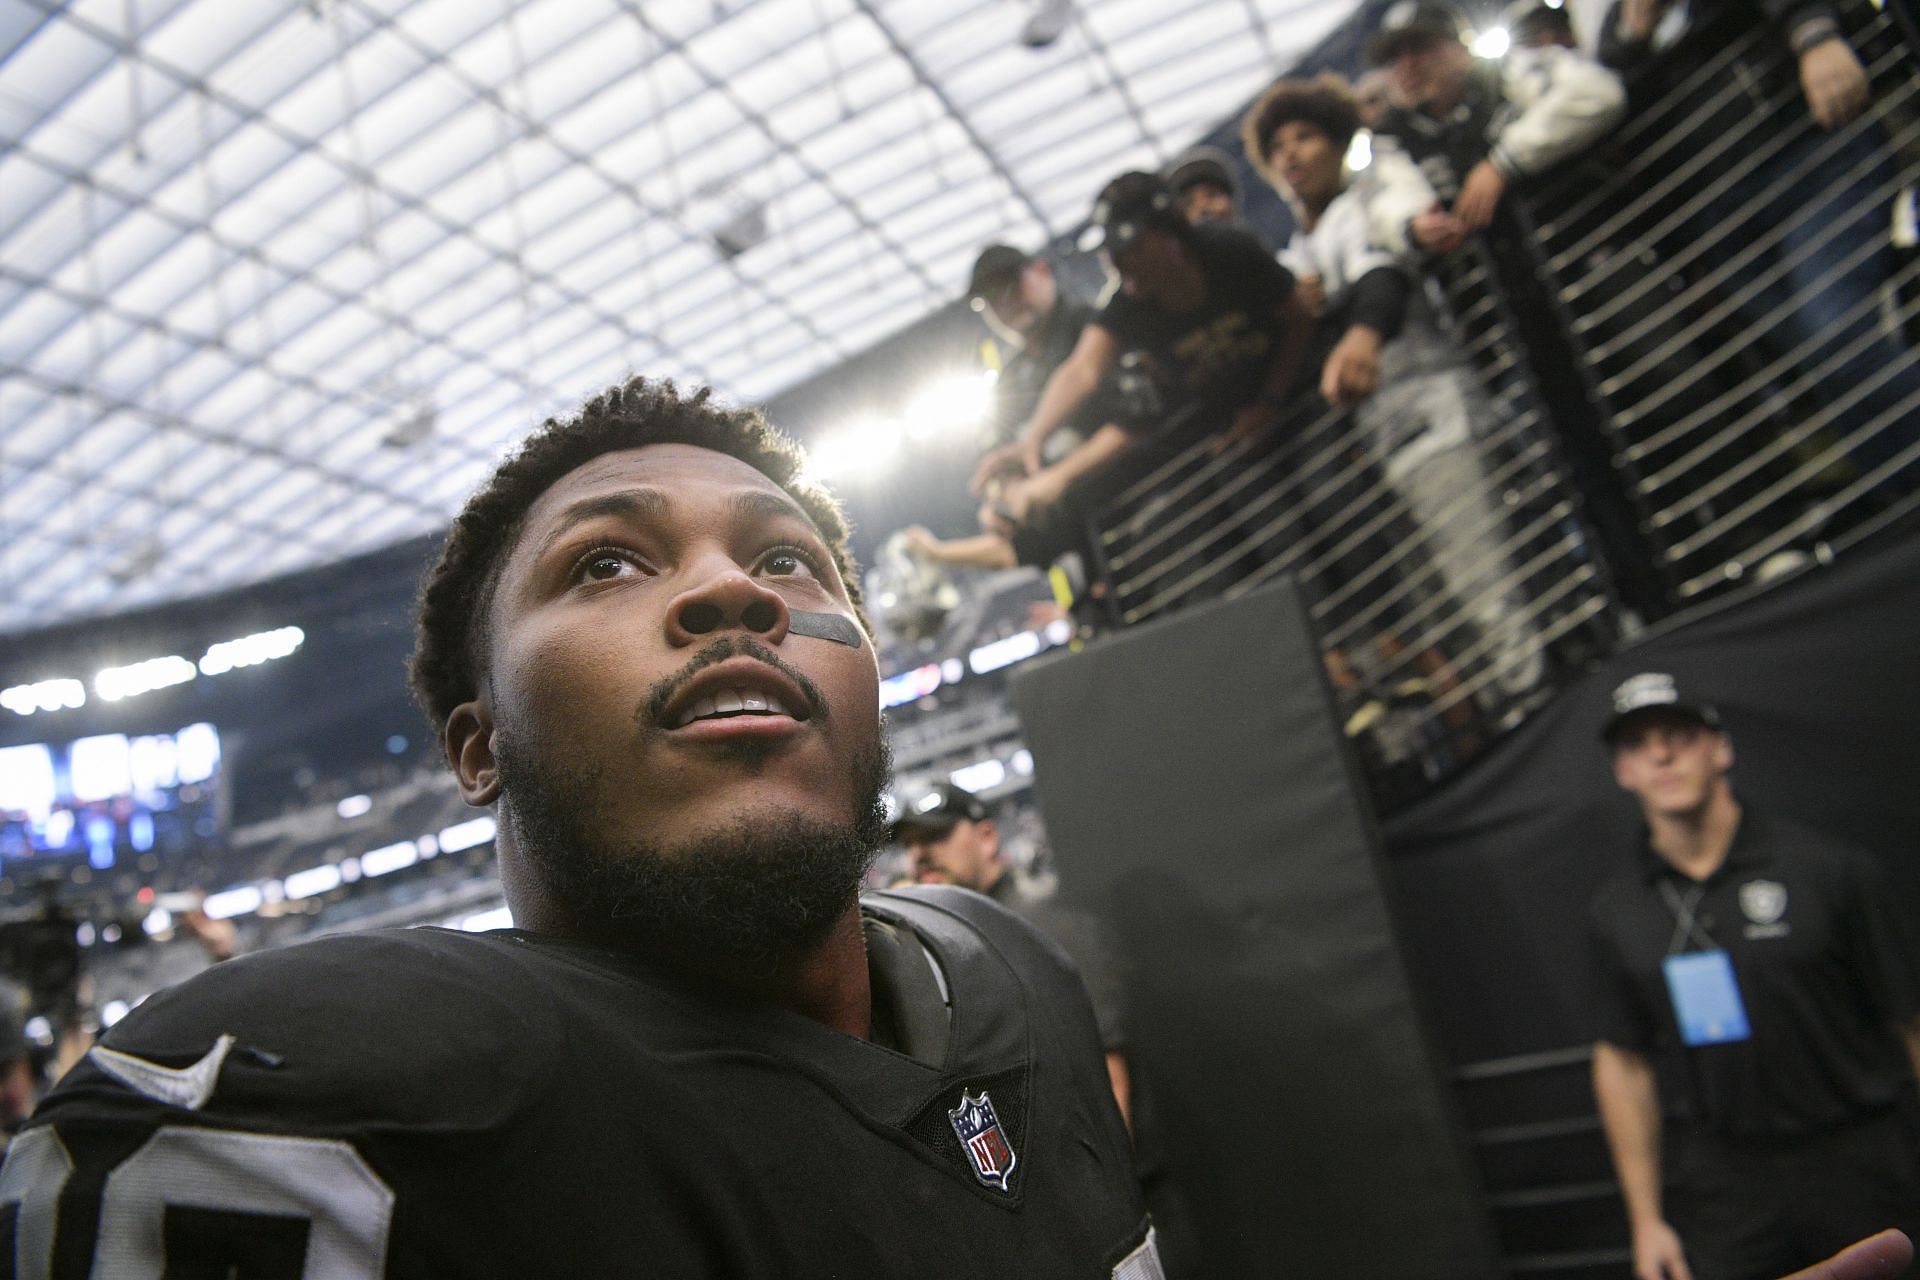 Josh Jacobs has sprinted his way into contention for the top 10 NFL players from Alabama list